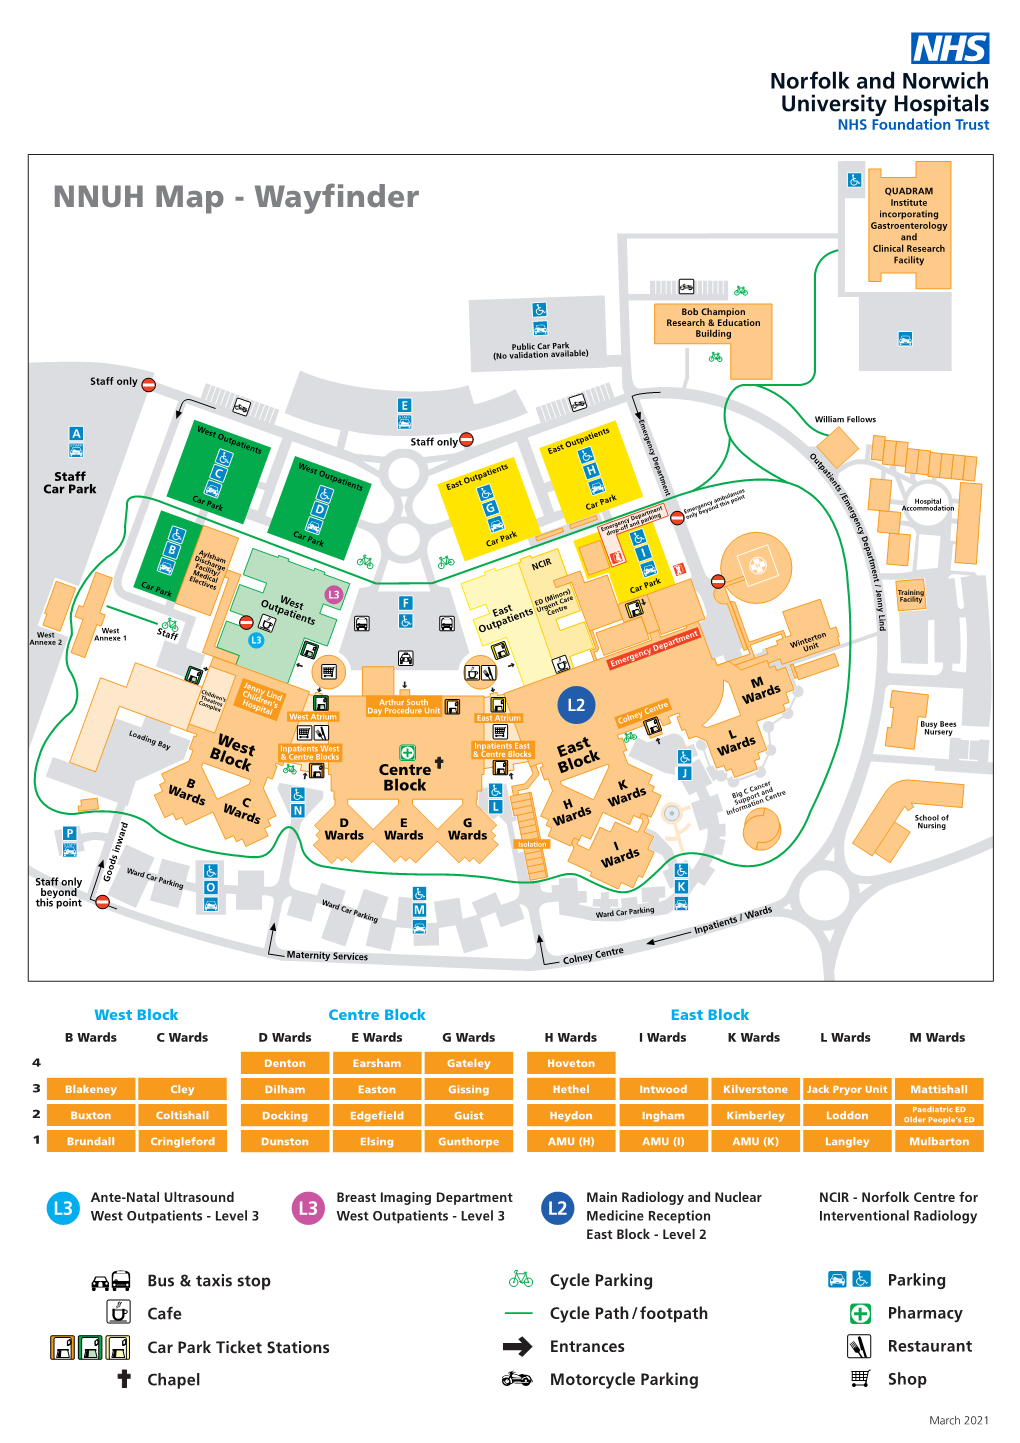 NNUH Map - Wayfinder Institute Incorporating Gastroenterology and Clinical Research Facility